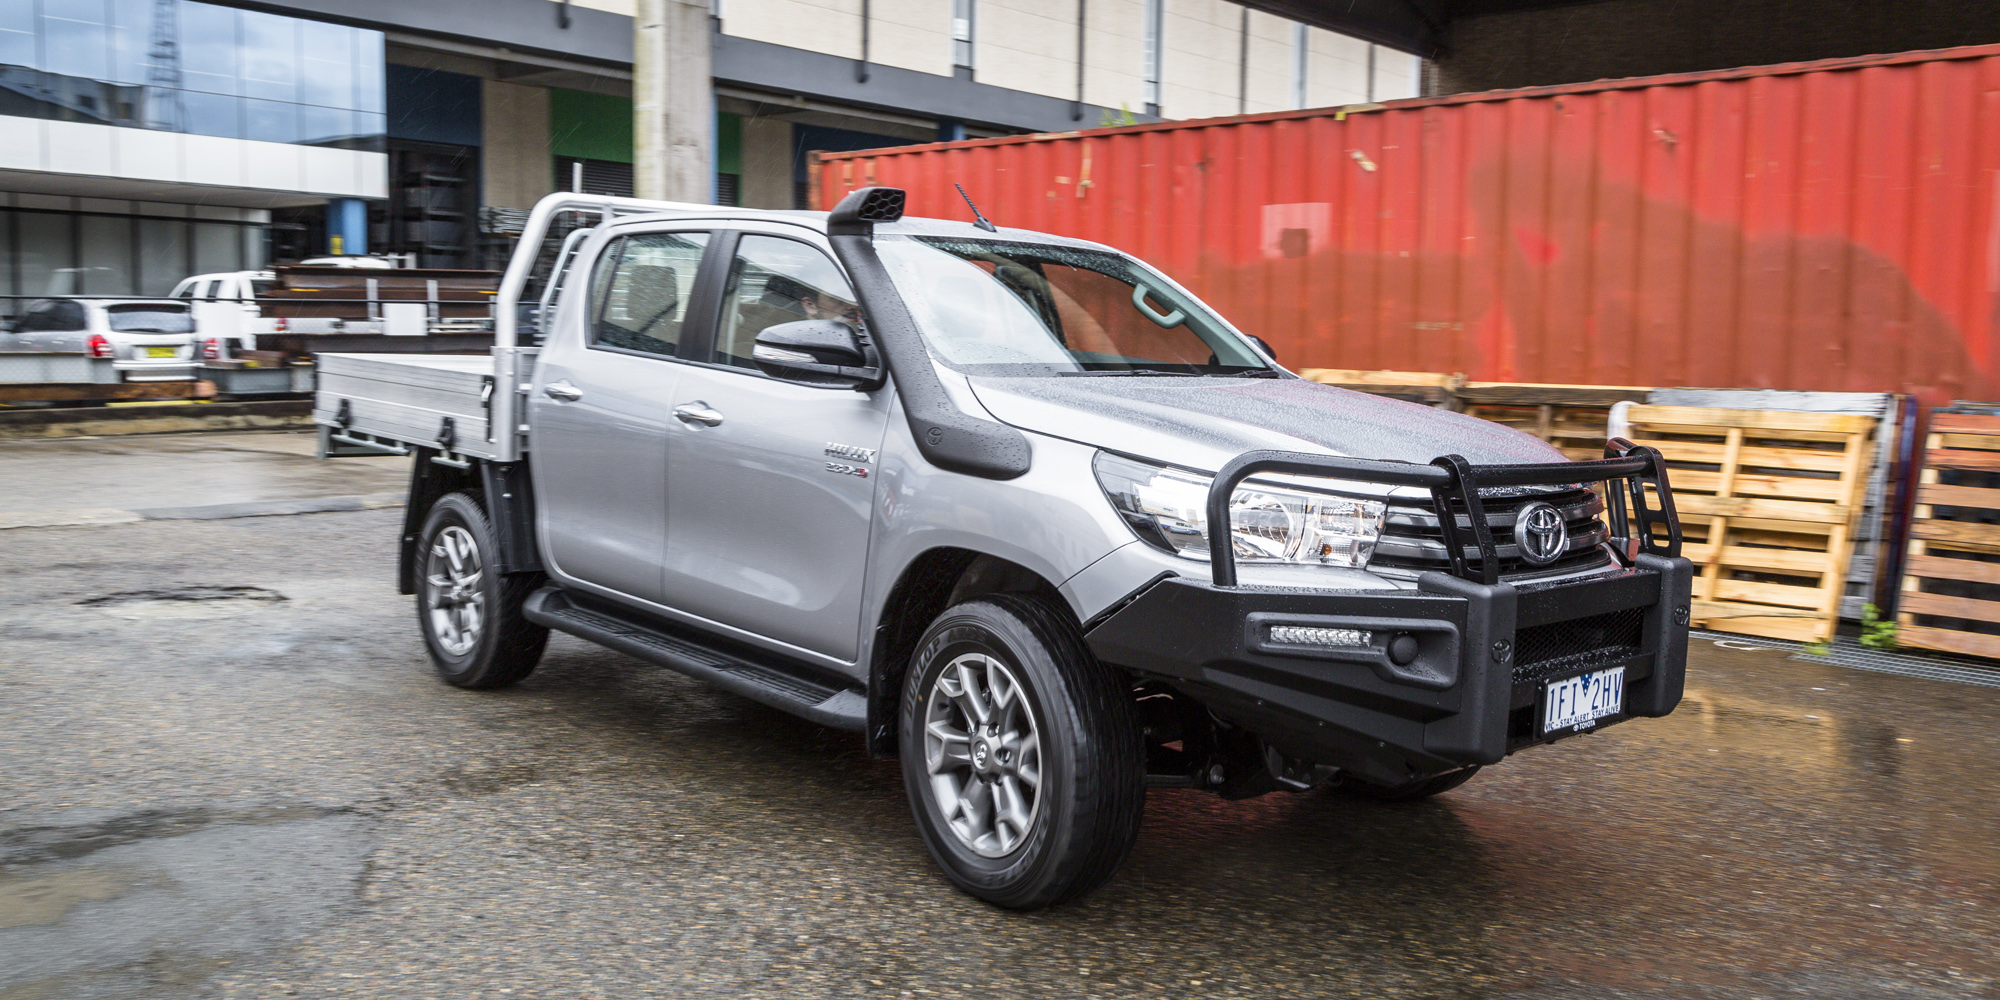 2016 Toyota HiLux Workmate 4 2 Single Cab Review Photos CarAdvice